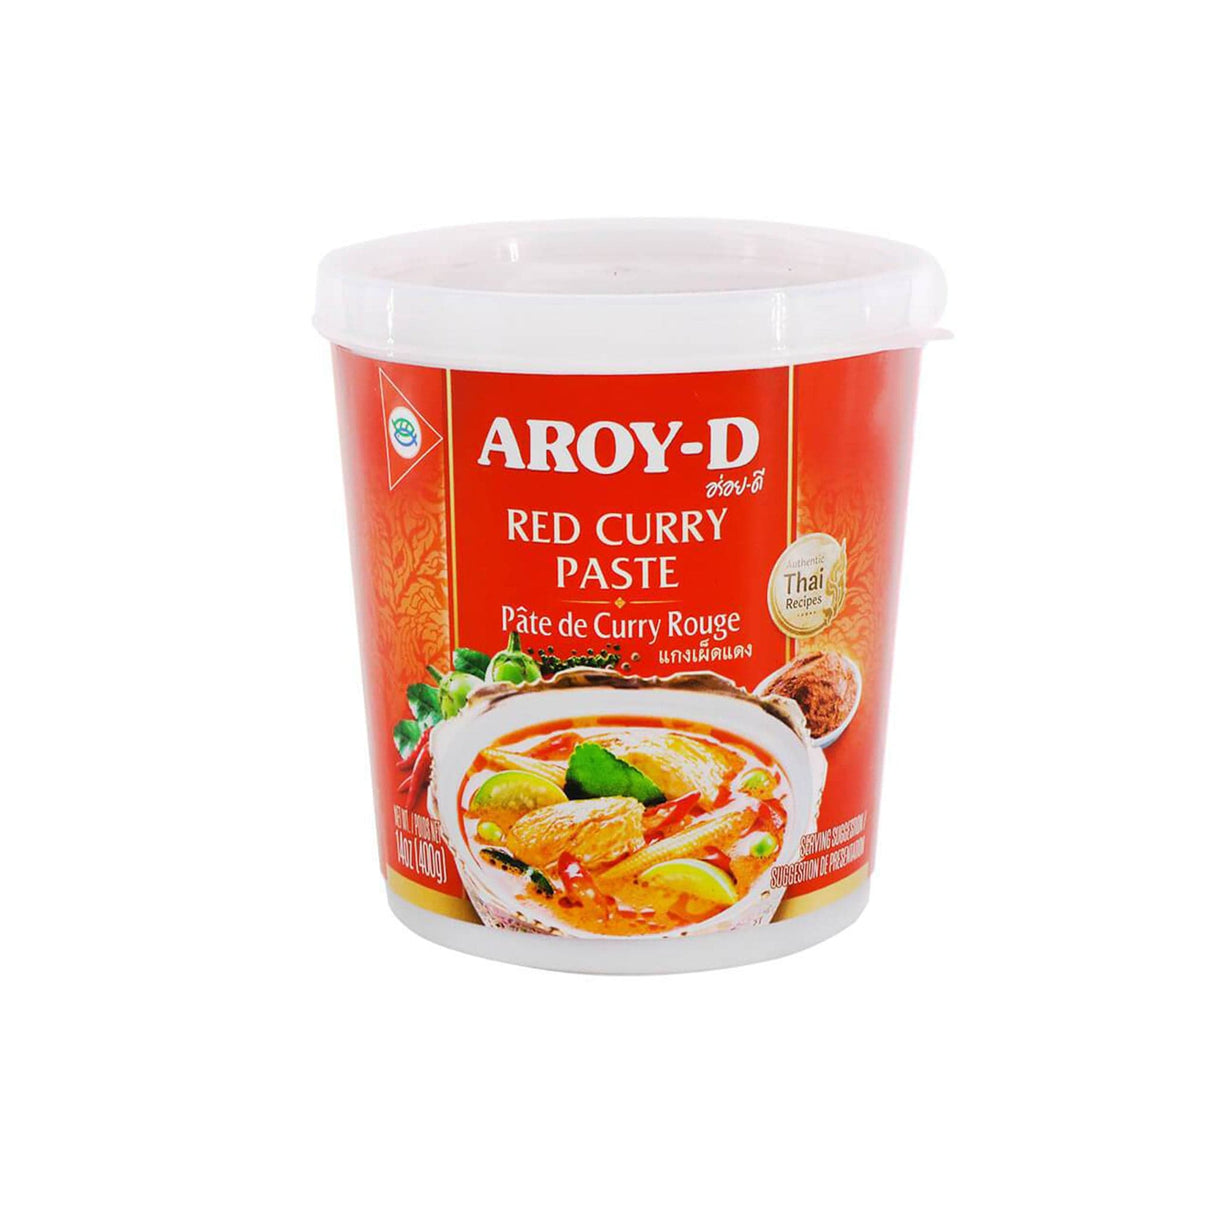 Aroy-d Red Curry Paste